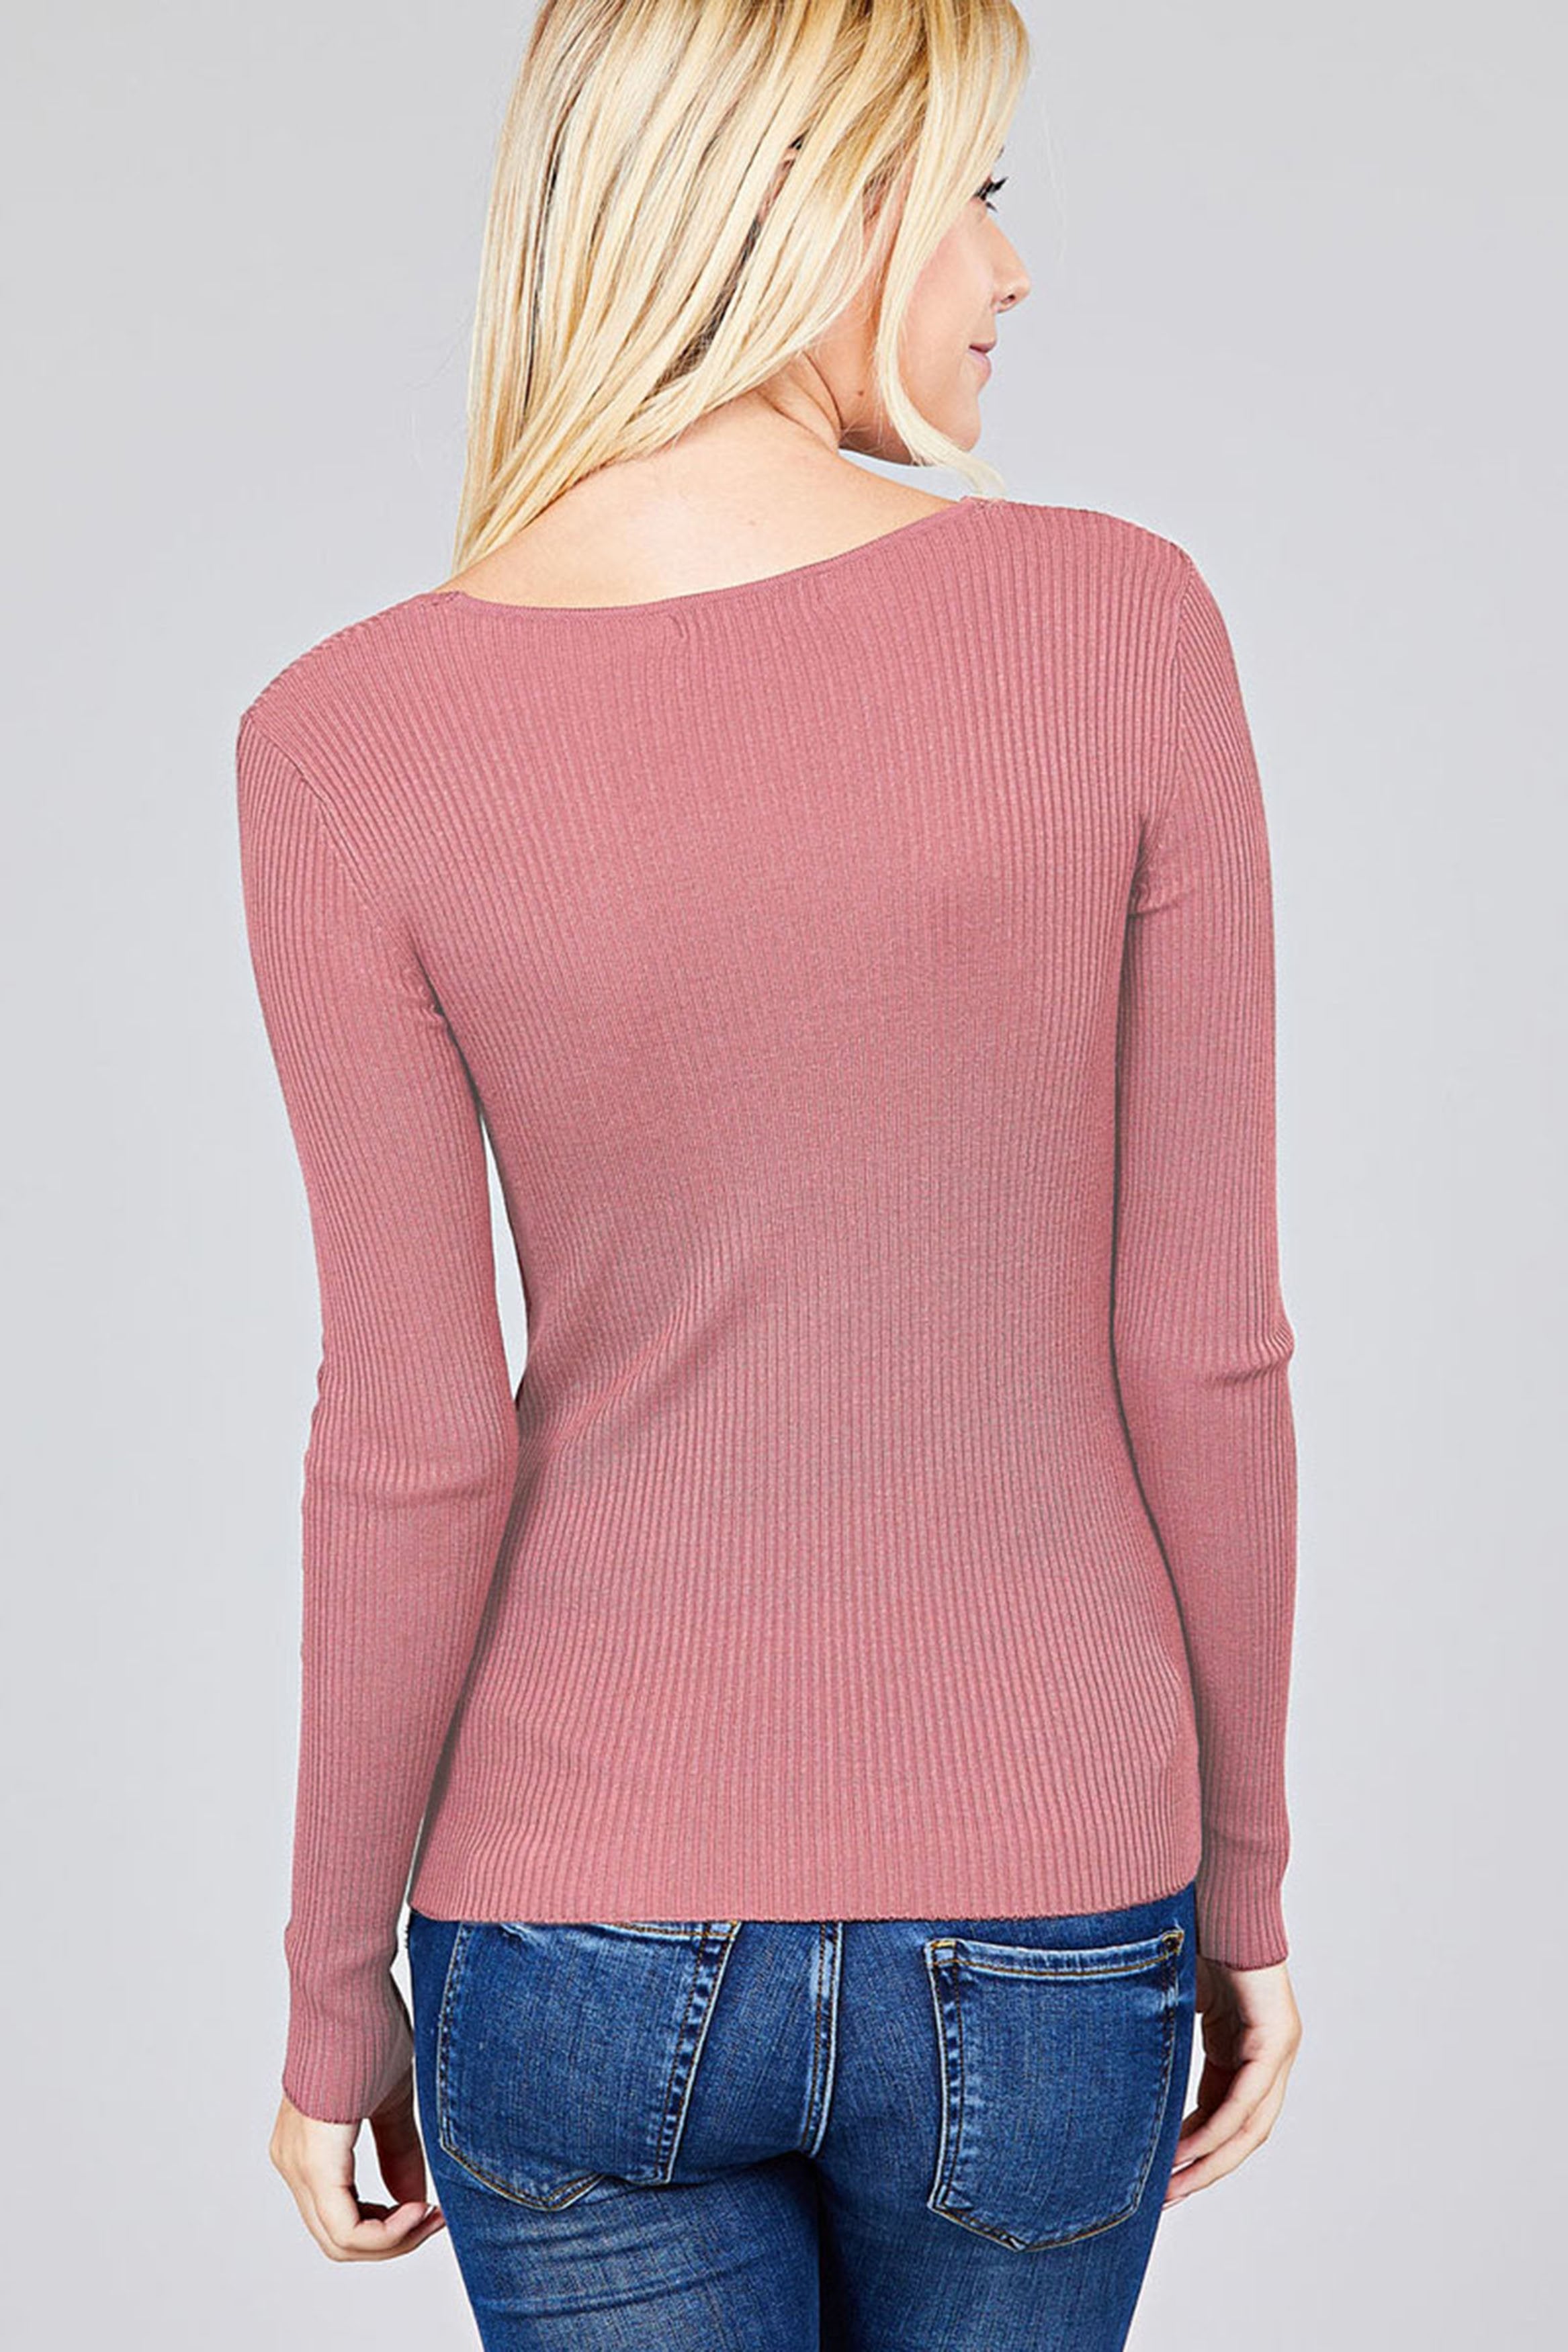 Women's Plus Size Fitted V Neck Ribbed Knit Lightweight Sweater Top